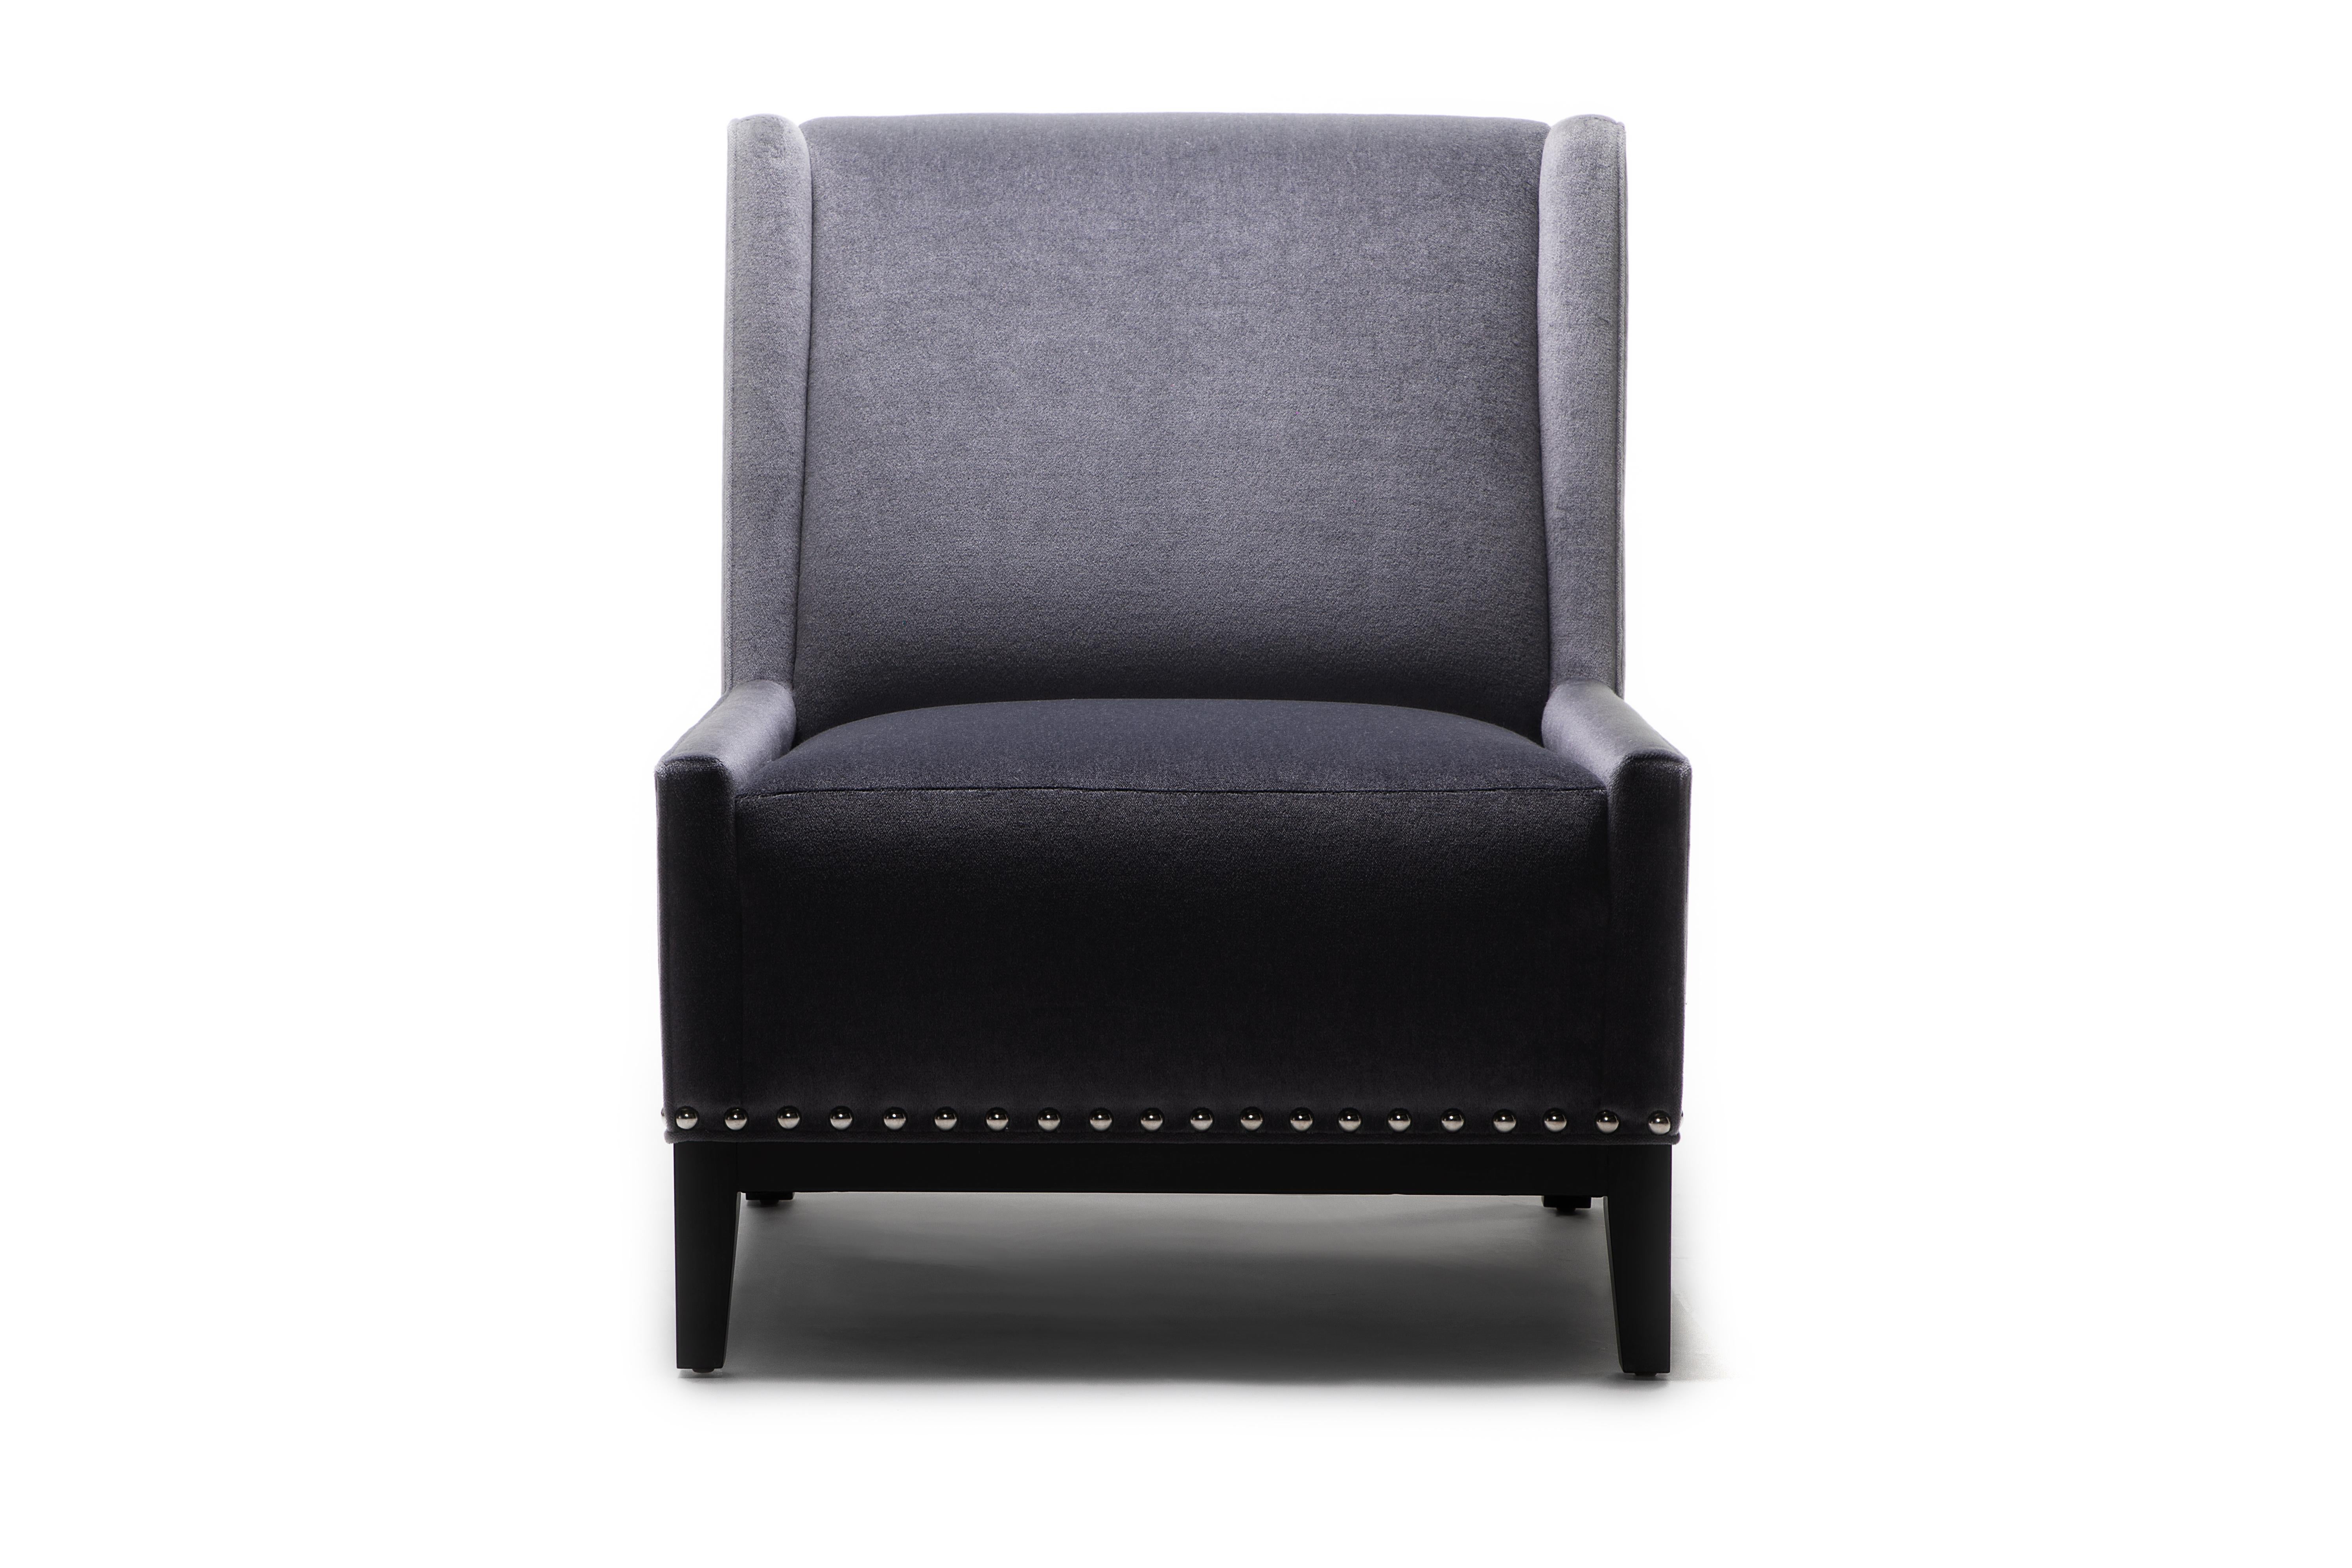 Meet Roma, a confident piece that commands attention whether he is placed at the head of your dining table or in a power position in your office. Covered in leather or supple mohair fabric, his tall, sturdy backing and chrome nail heads add a touch